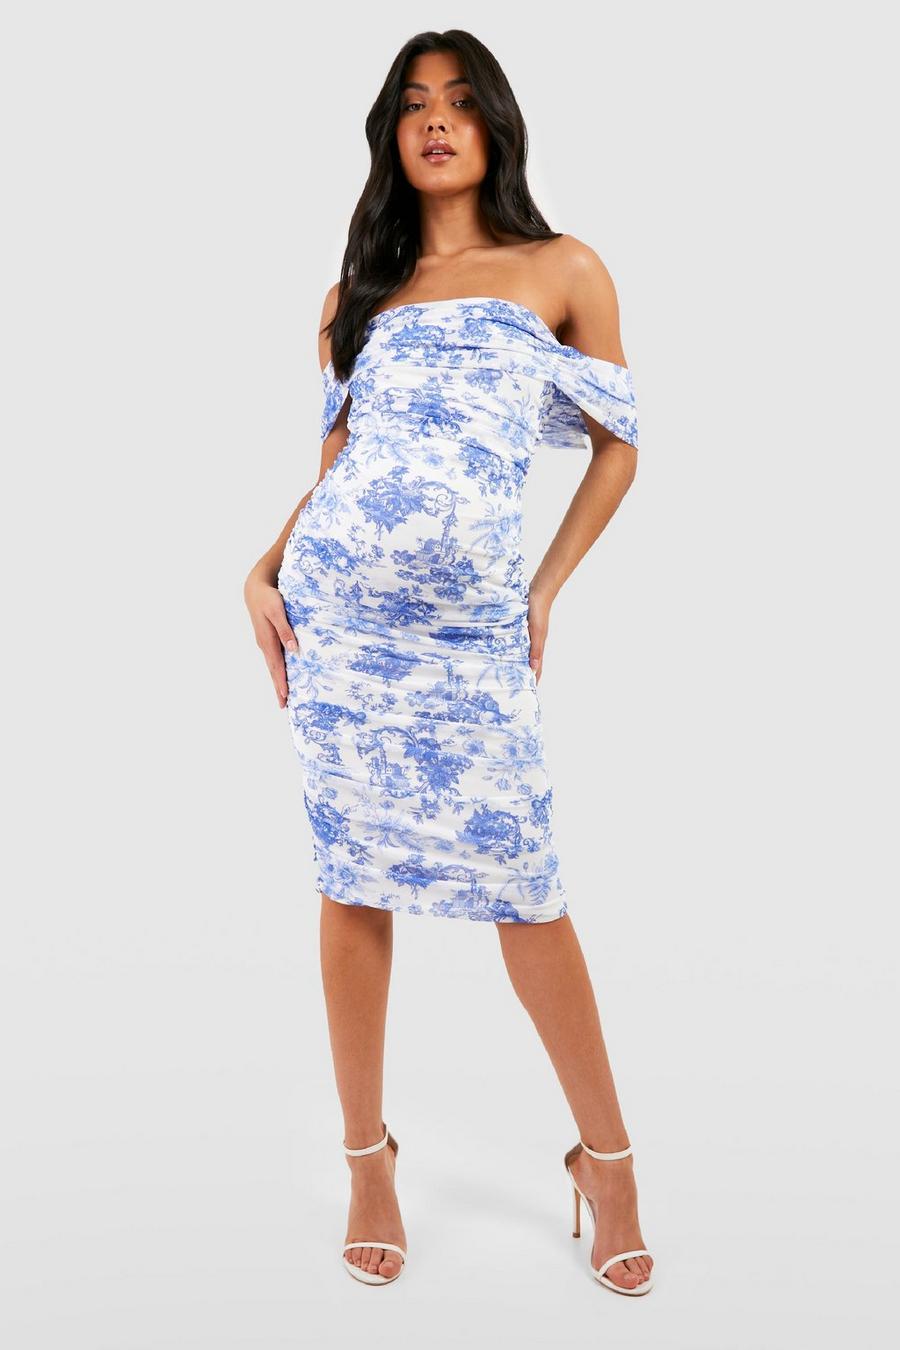 New* Ash Blue A Pea in the Pod Maternity Ruched Versatile Maternity Dress  (Size Medium) - Motherhood Closet - Maternity Consignment